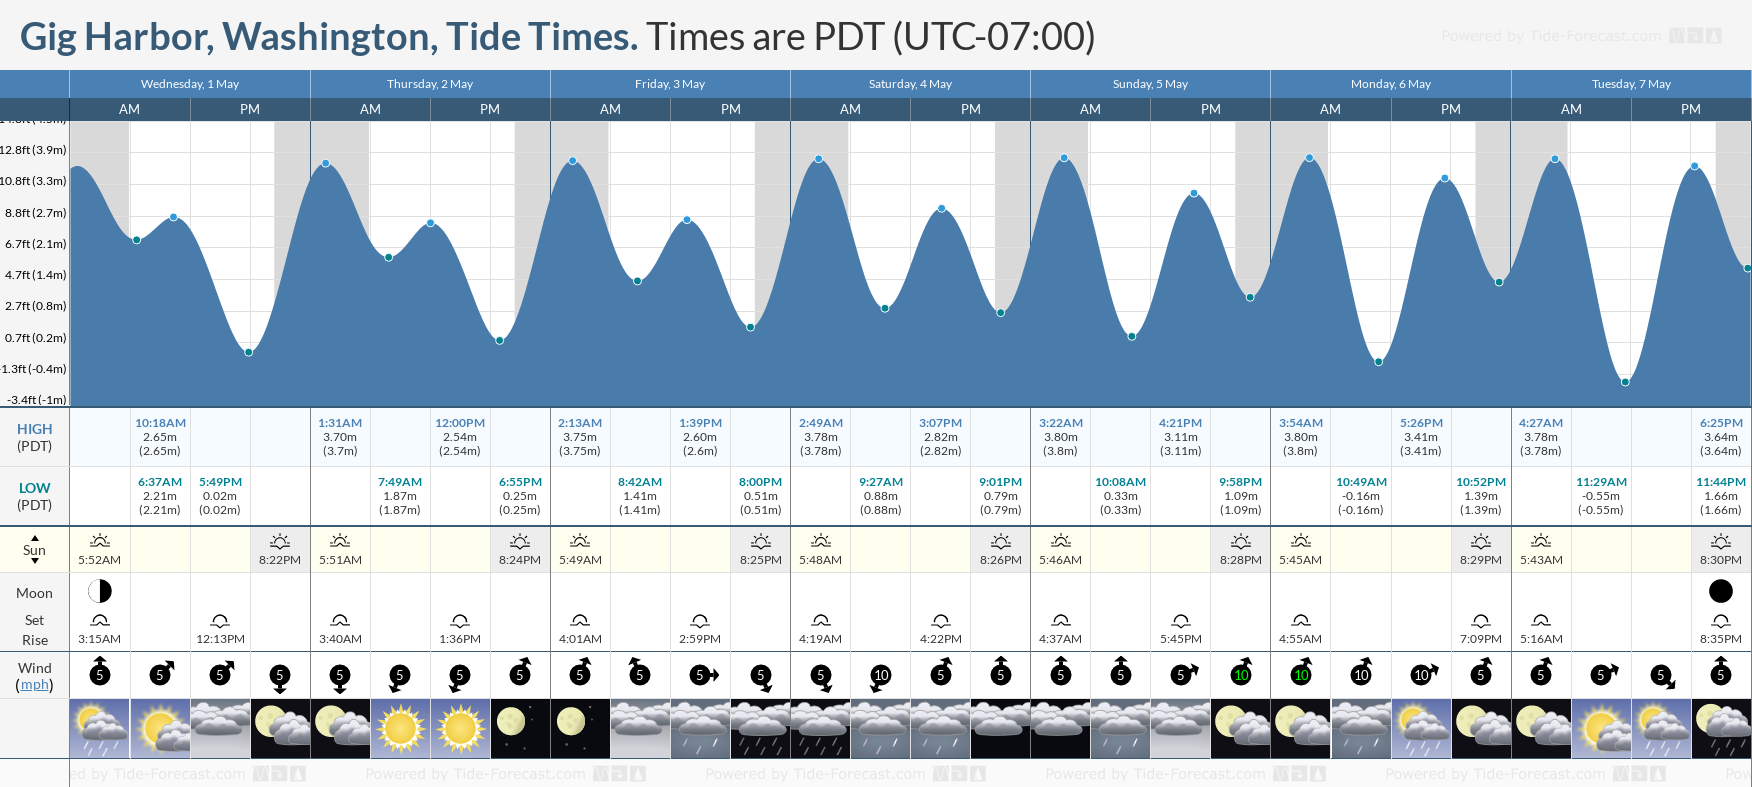 Gig Harbor, Washington Tide Chart including high and low tide times for the next 7 days